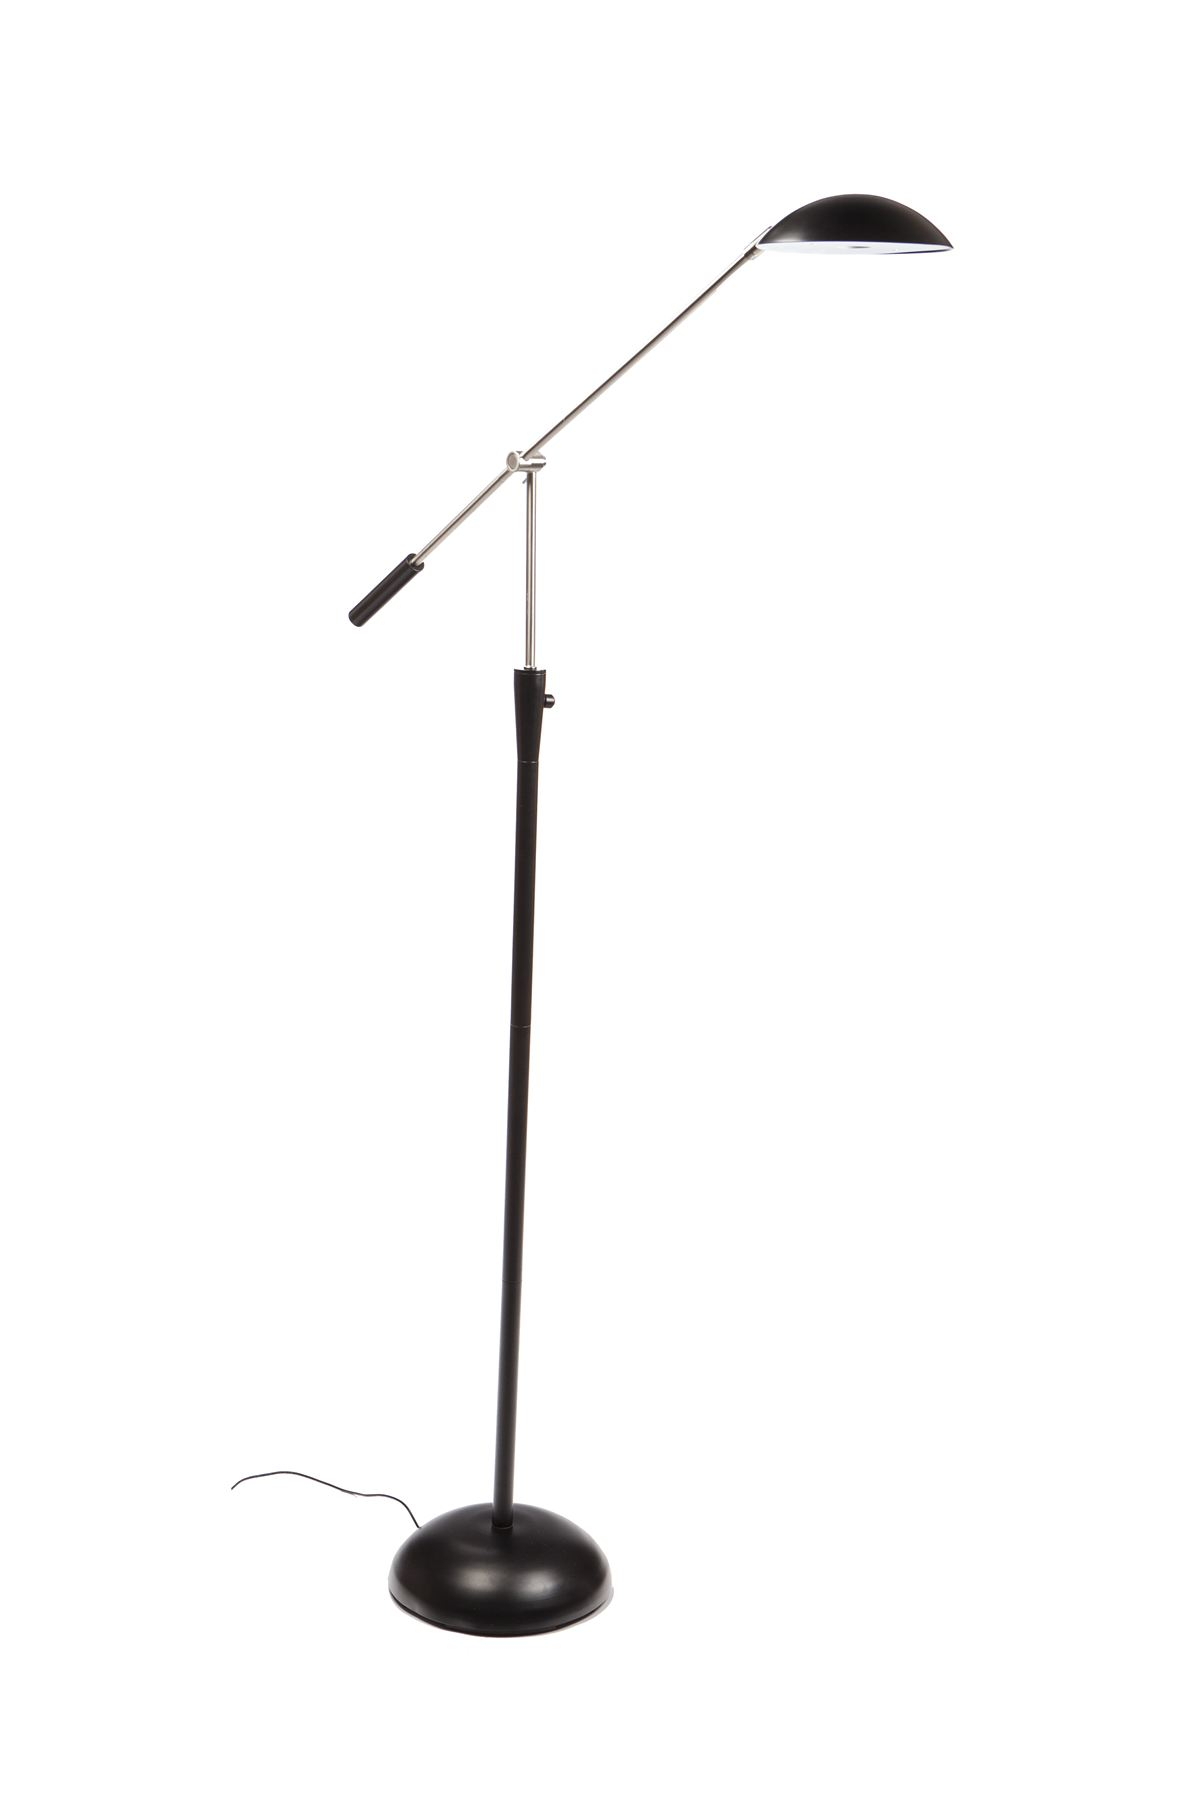 Details About Mighty Bright Lux Dome Led Floor Lamp Black Satin for dimensions 1200 X 1800